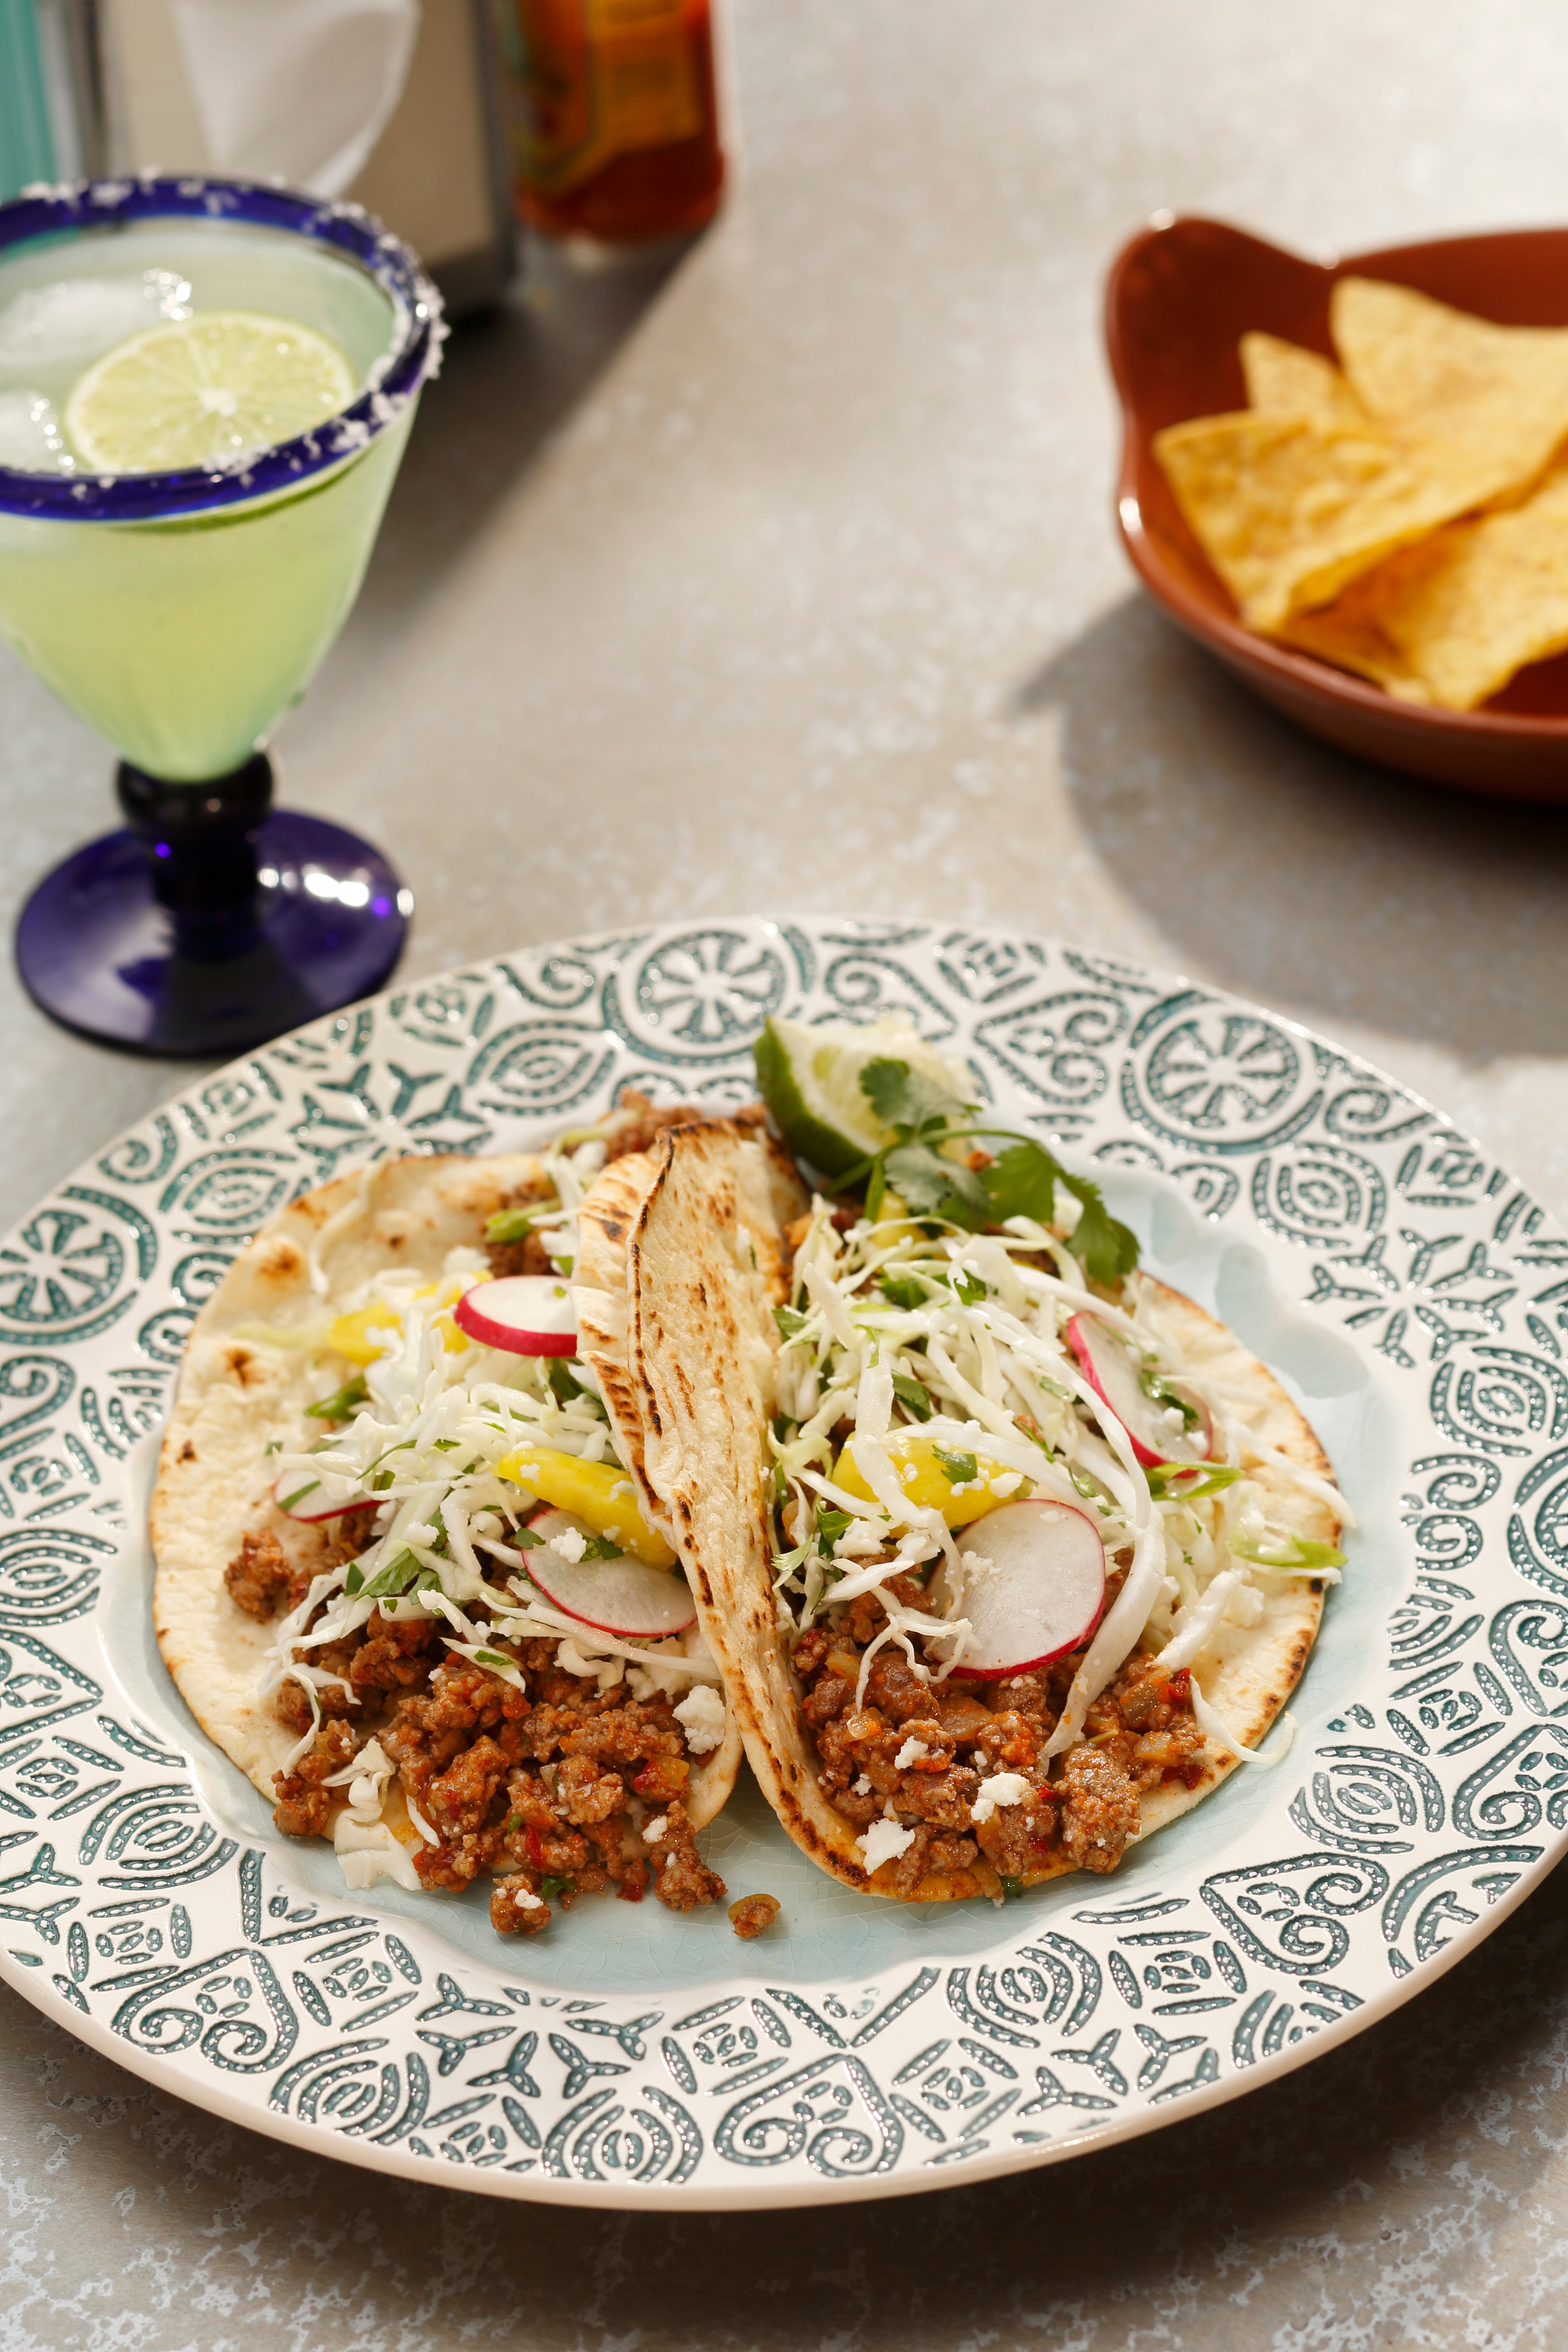 Spicy Chipotle Lamb Tacos with Cabbage, Radish & Pineapple Slaw